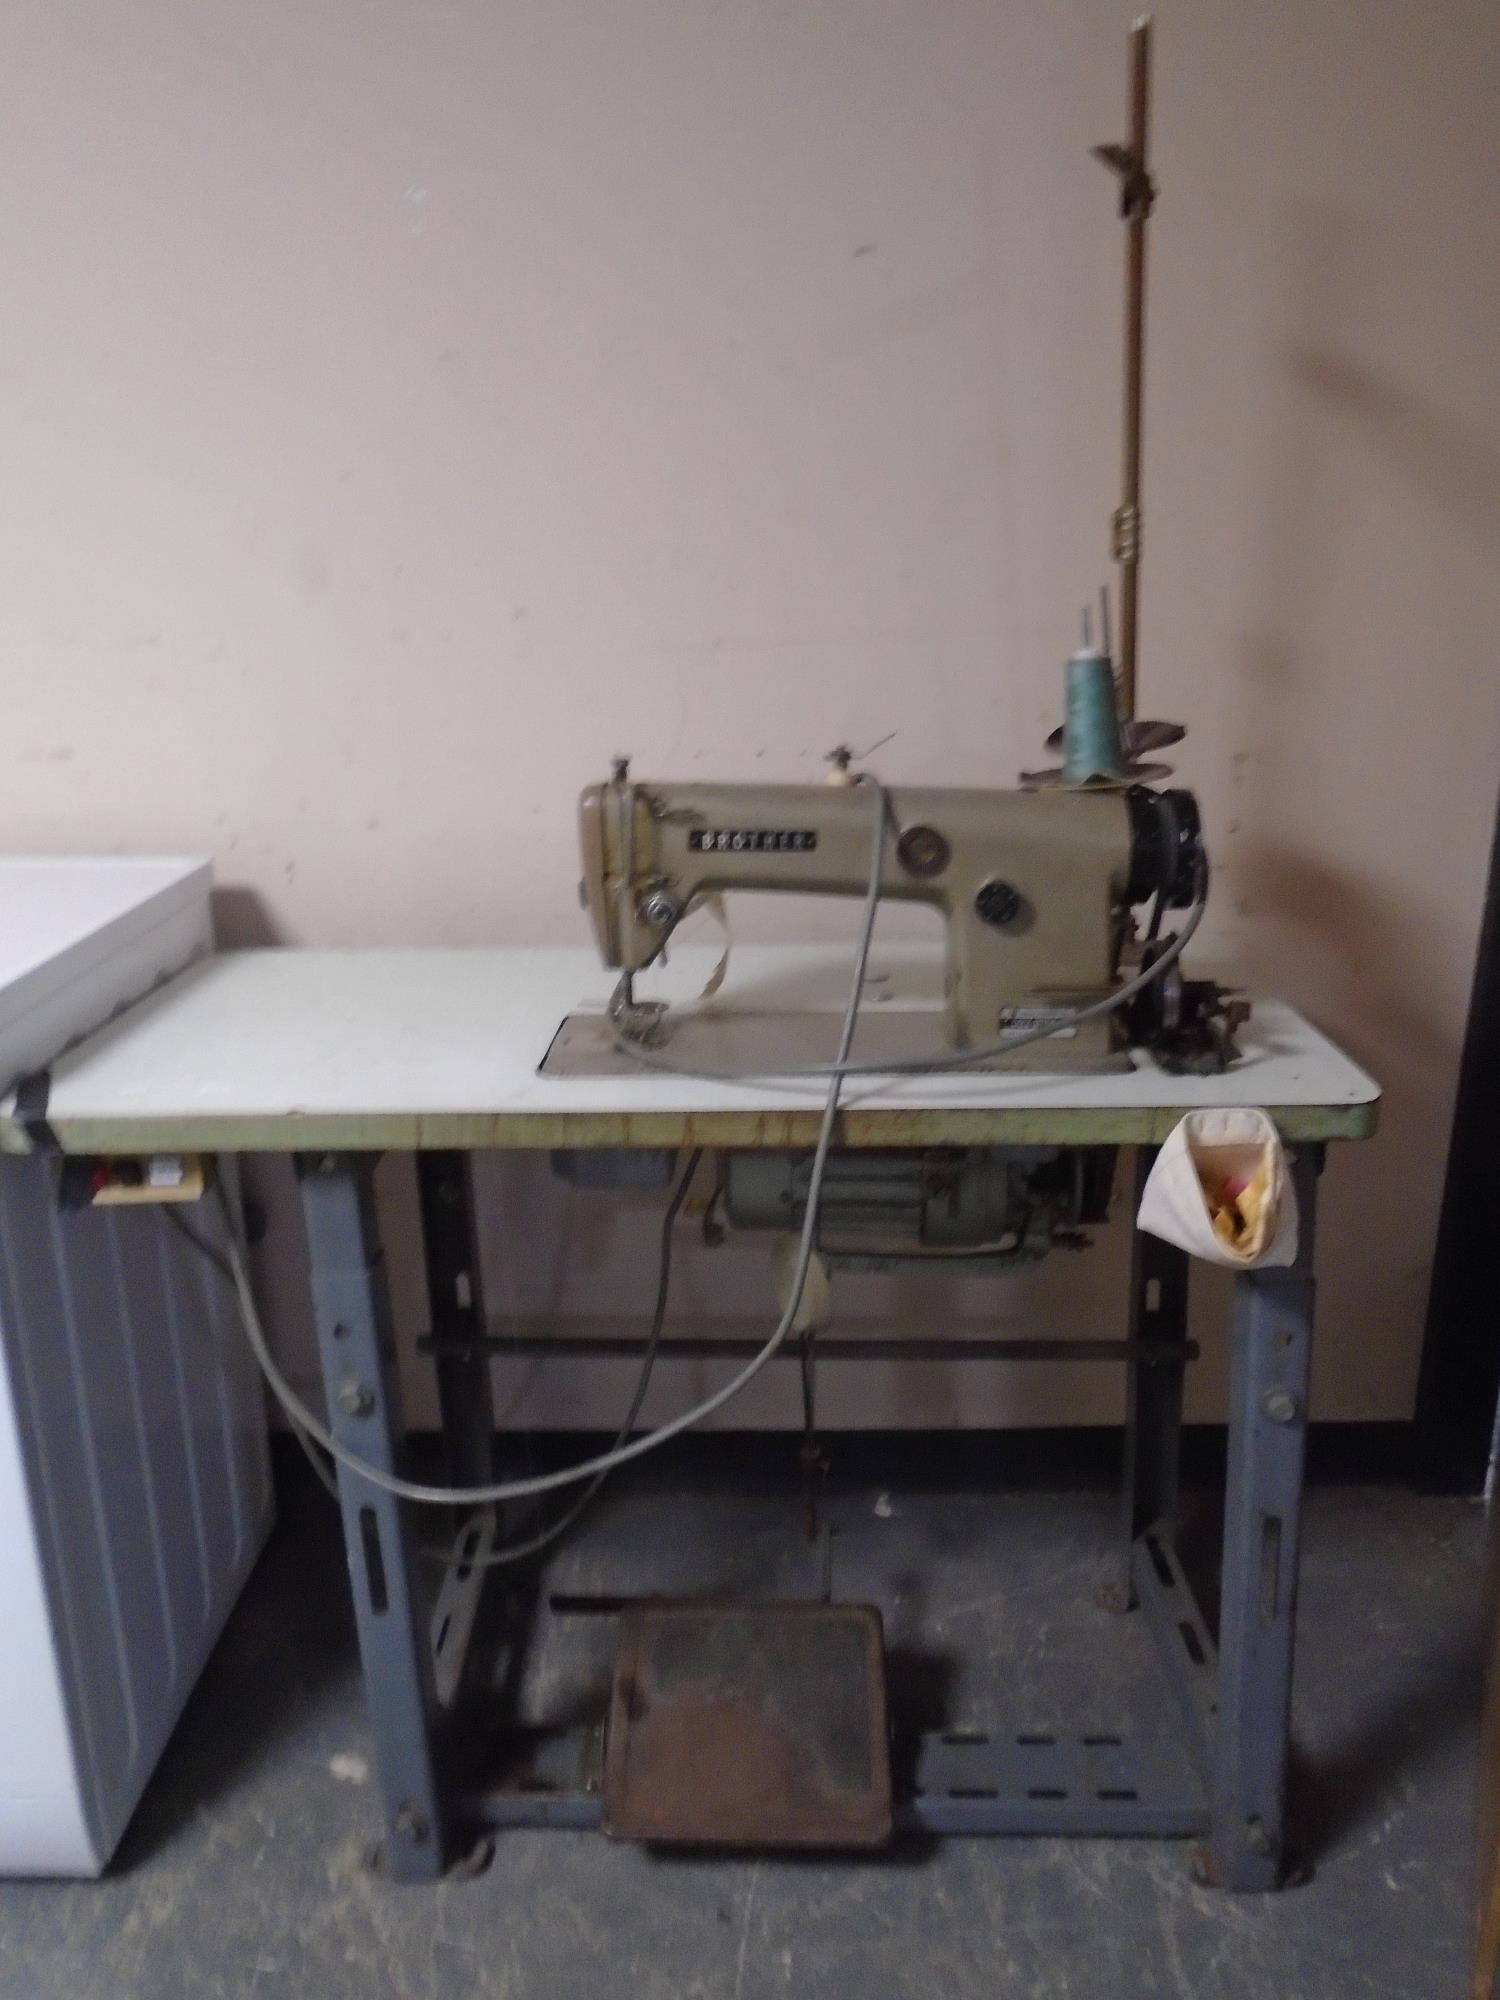 A Brother DB2-B755-3 industrial sewing machine in table.